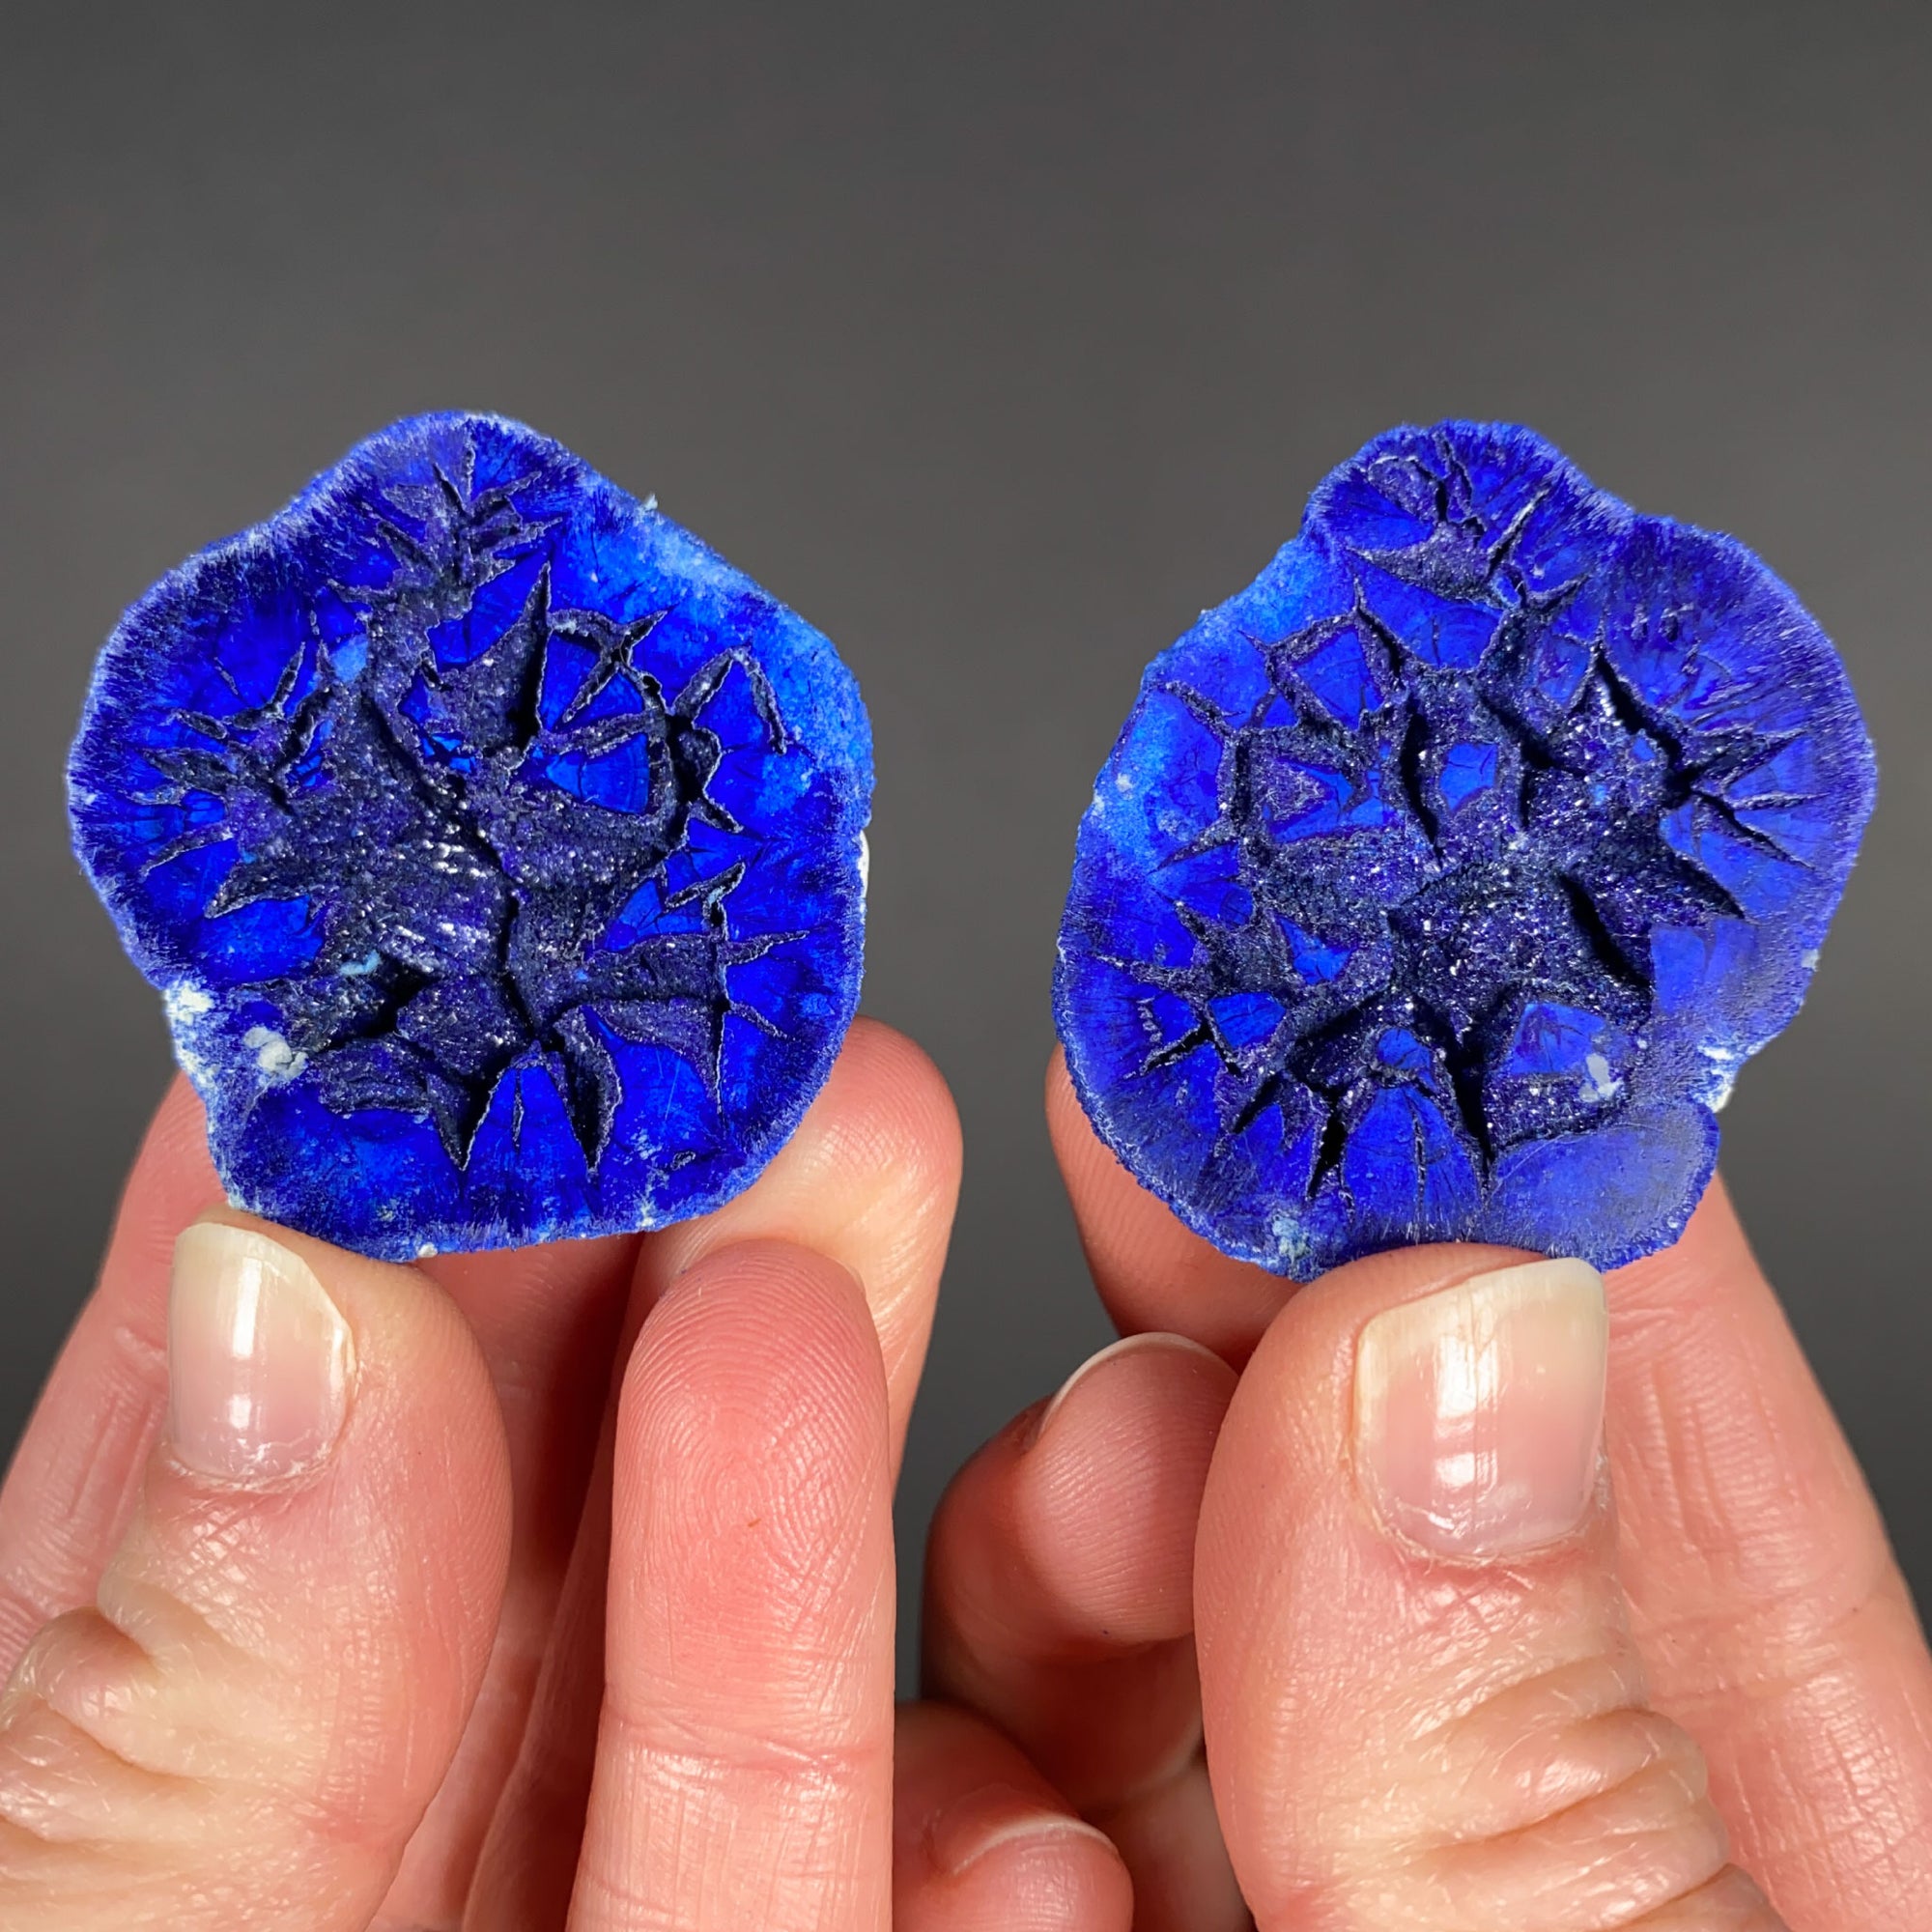 Azurite Geode with Blue Crystals Inside